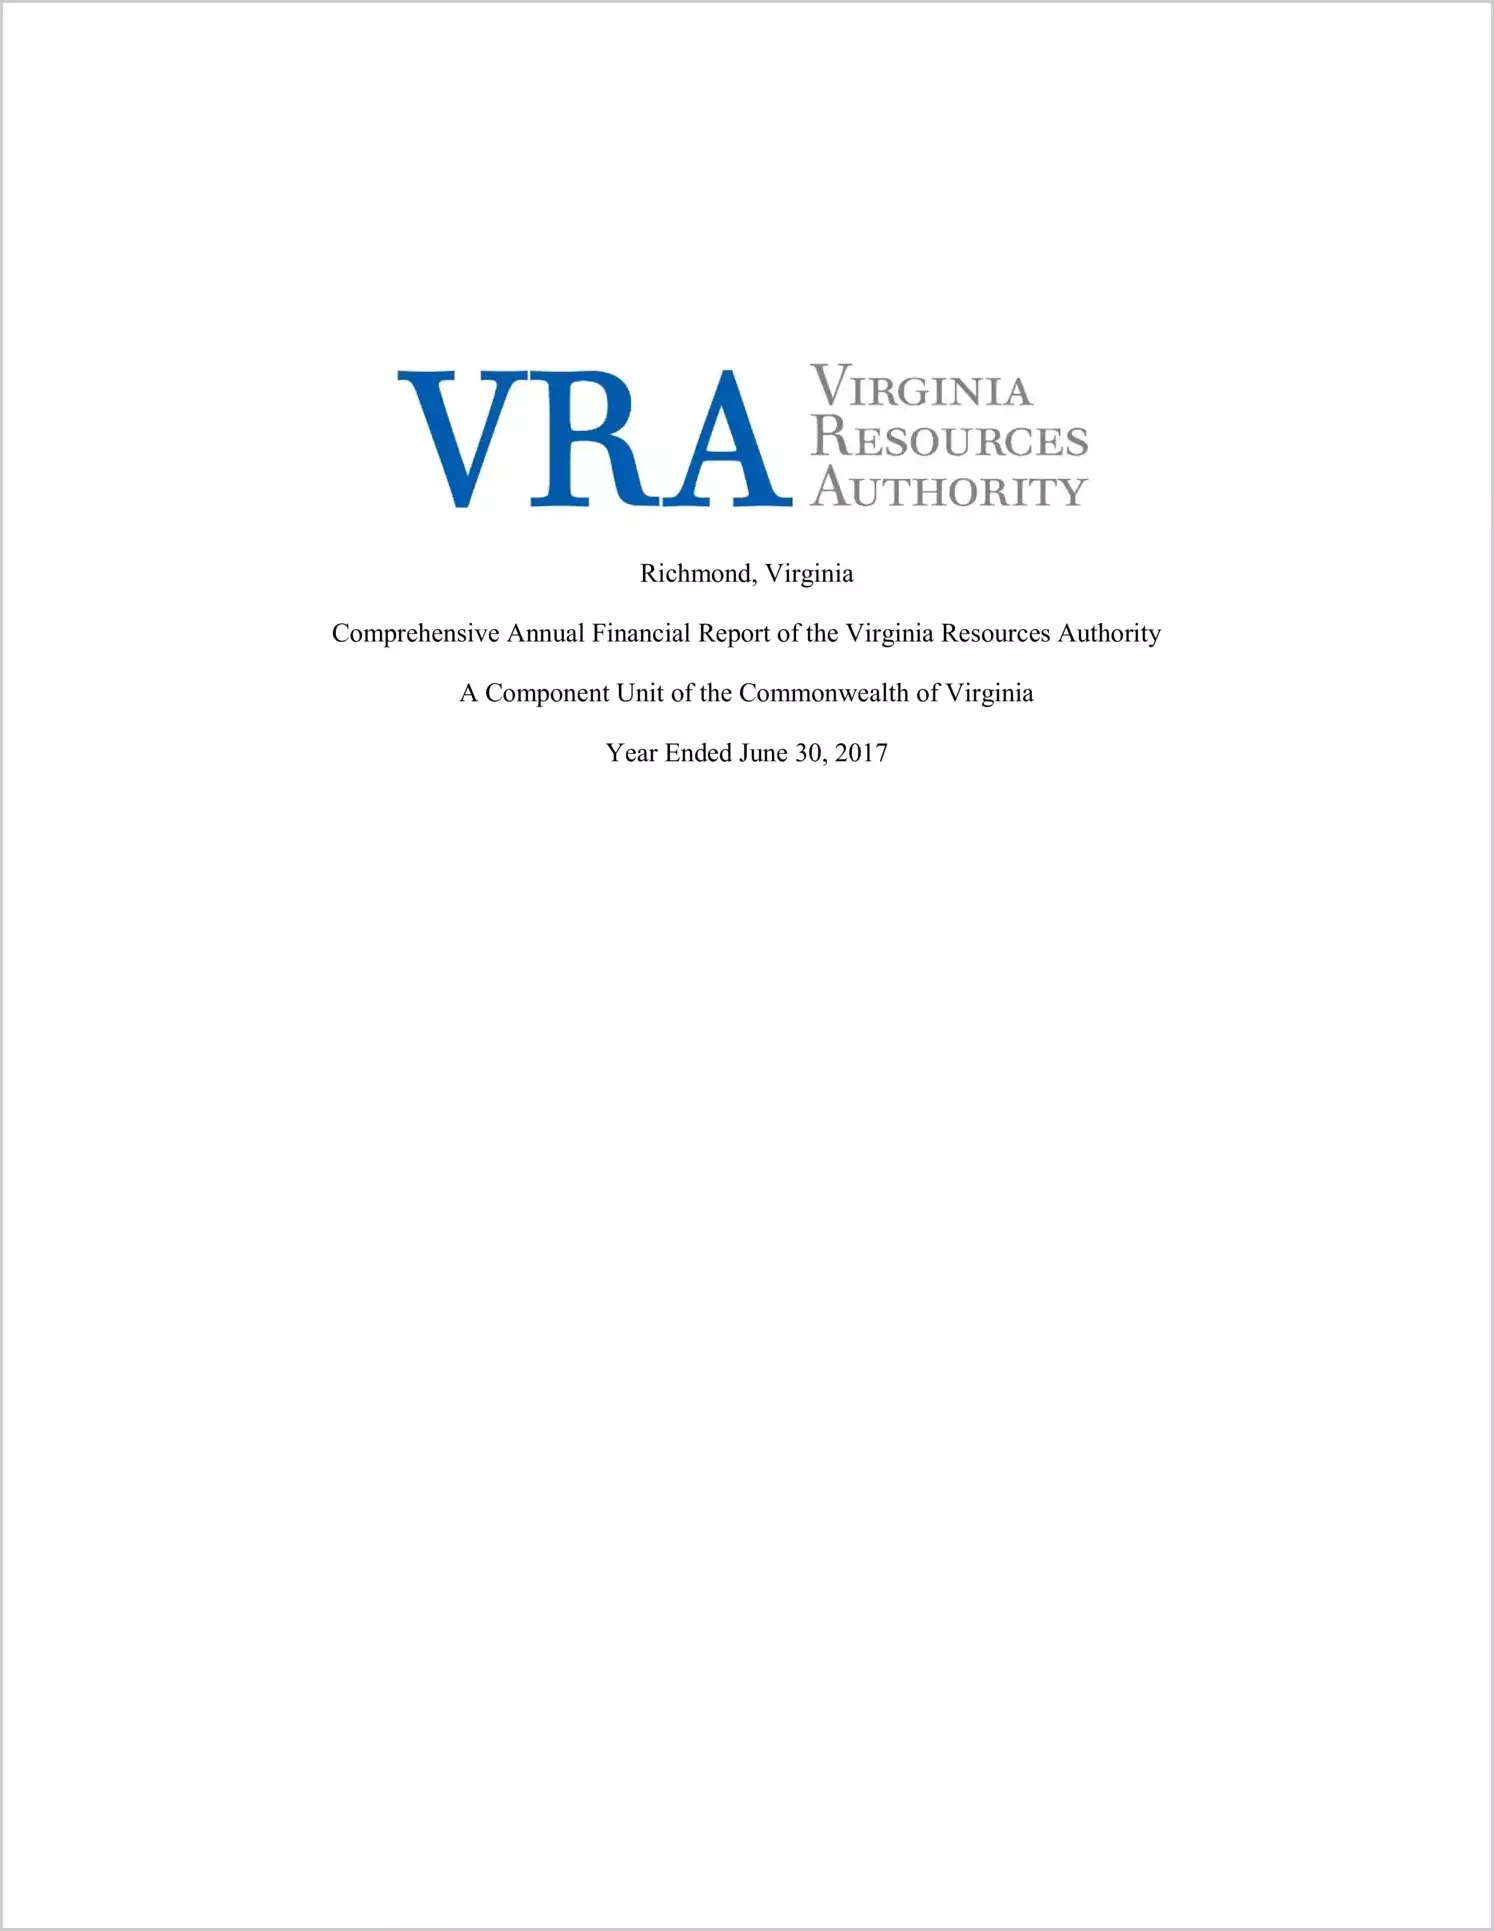 Virginia Resources Authority Financial Statements for the fiscal year ended June 30, 2017